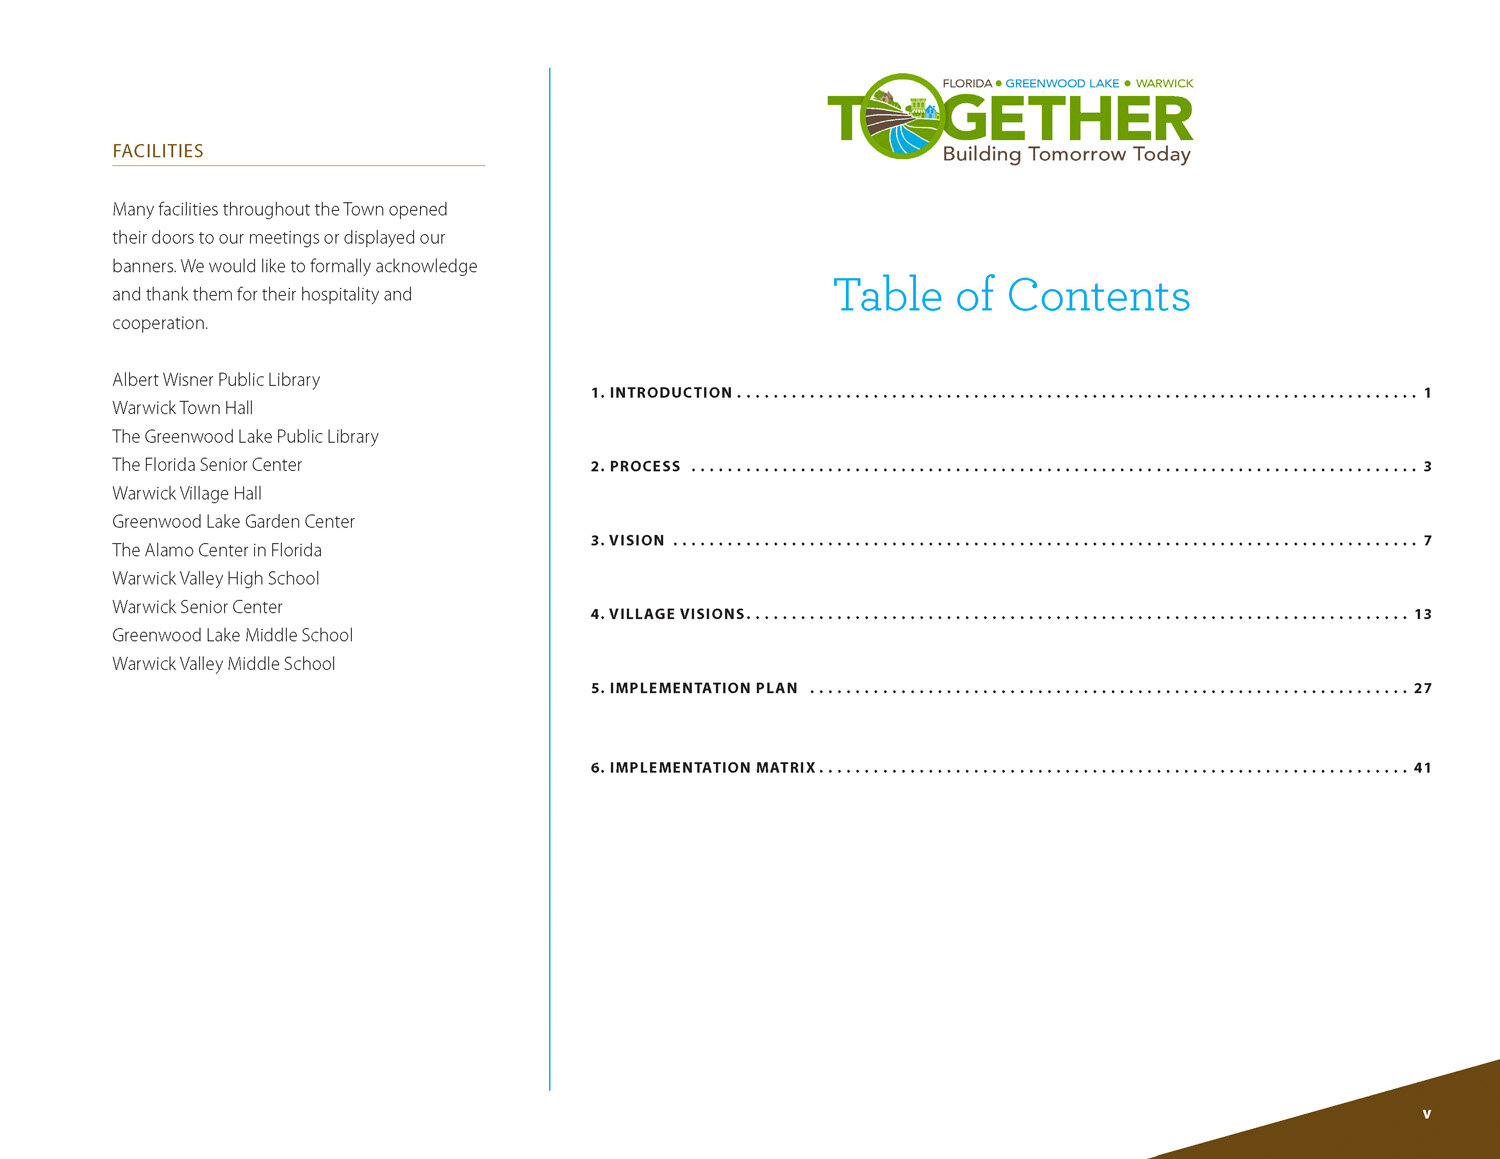 TOGETHER REPORT_Page_05.jpg